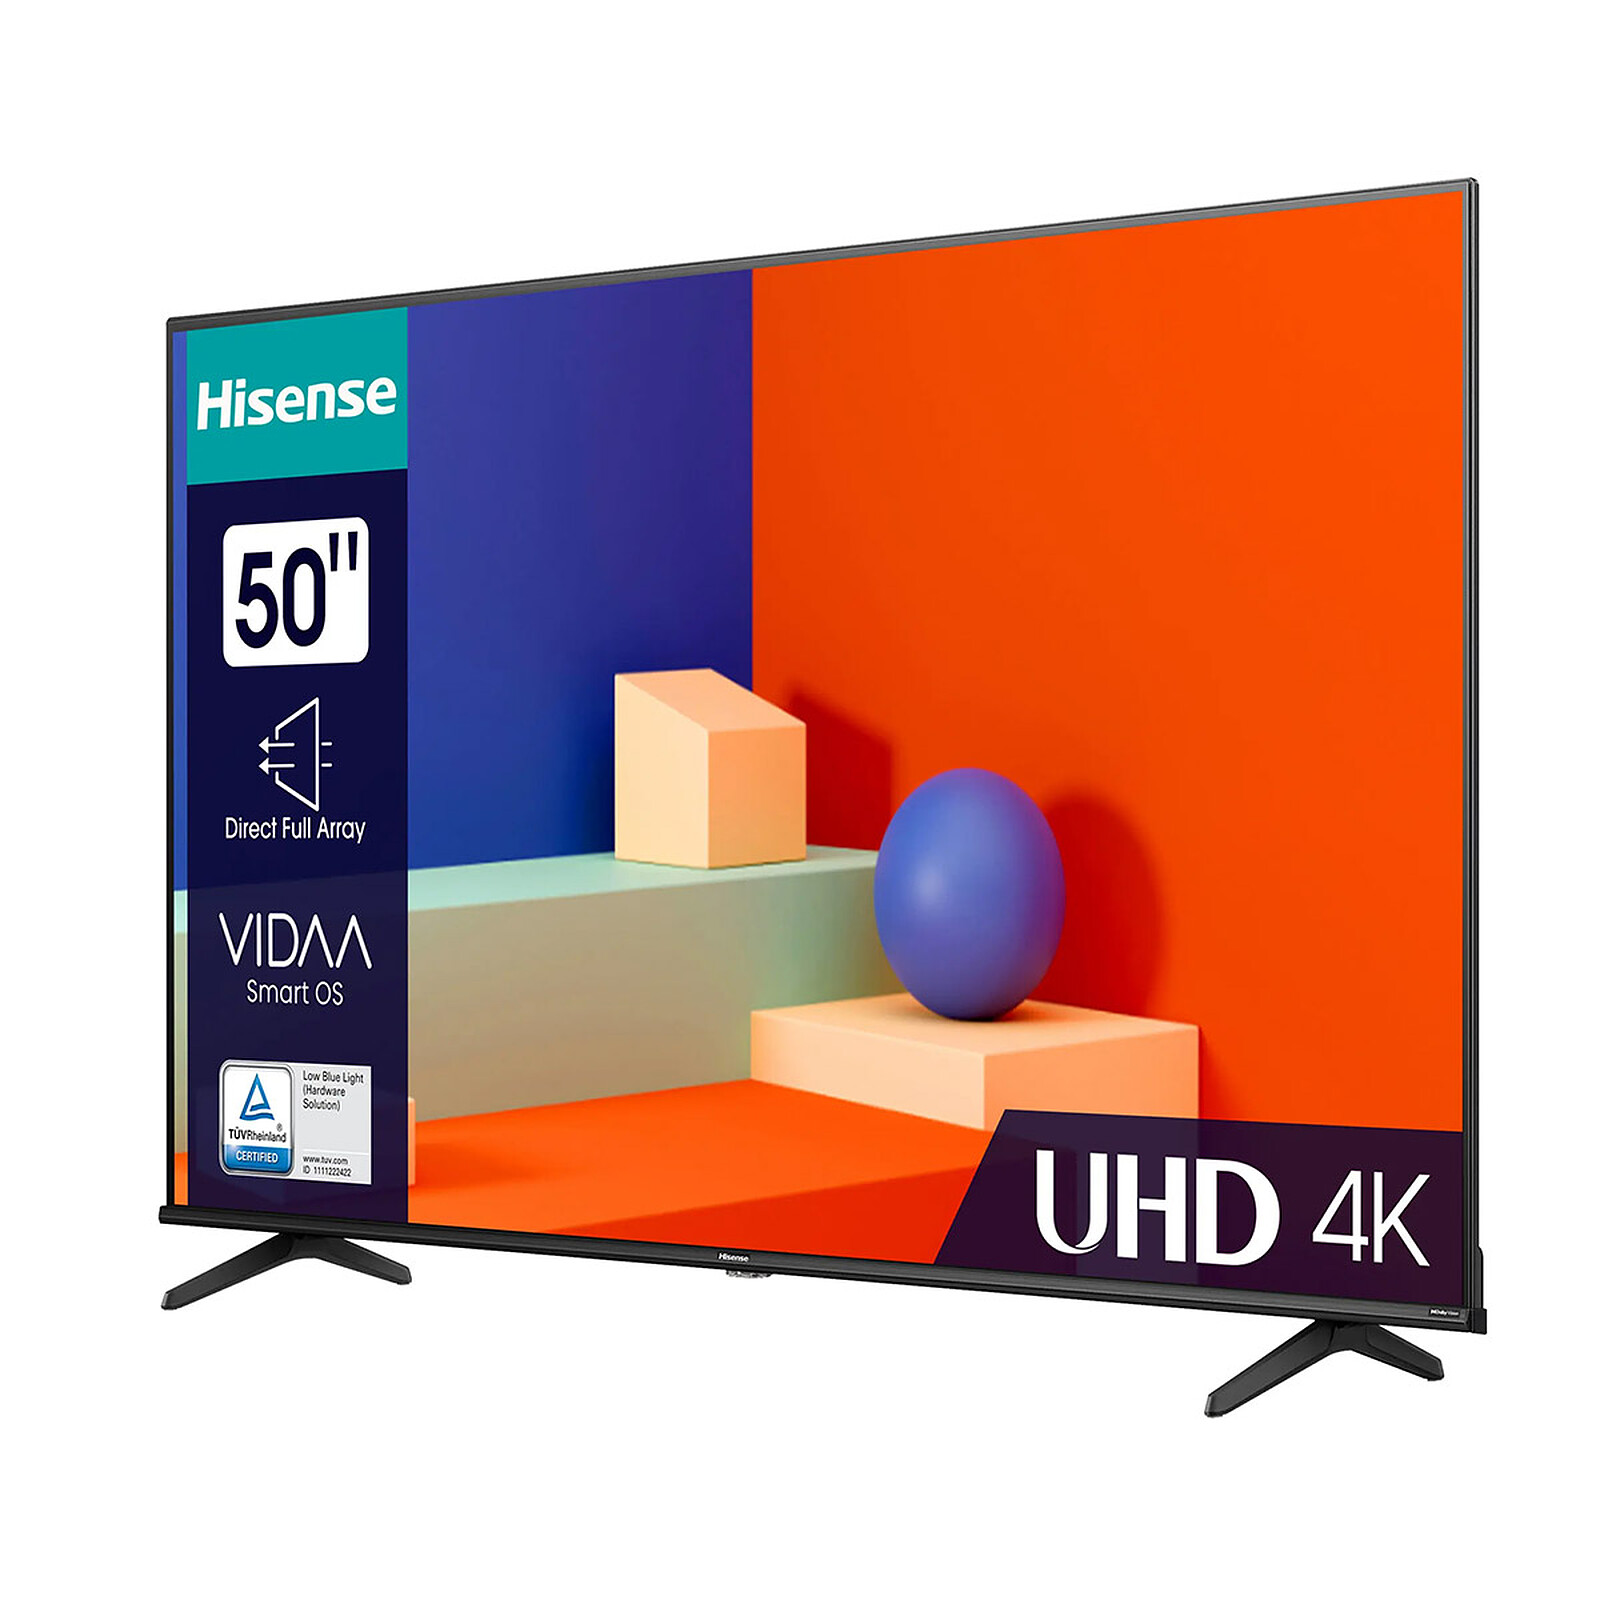 2023 Hisense A6K 4K TVs specifications and features